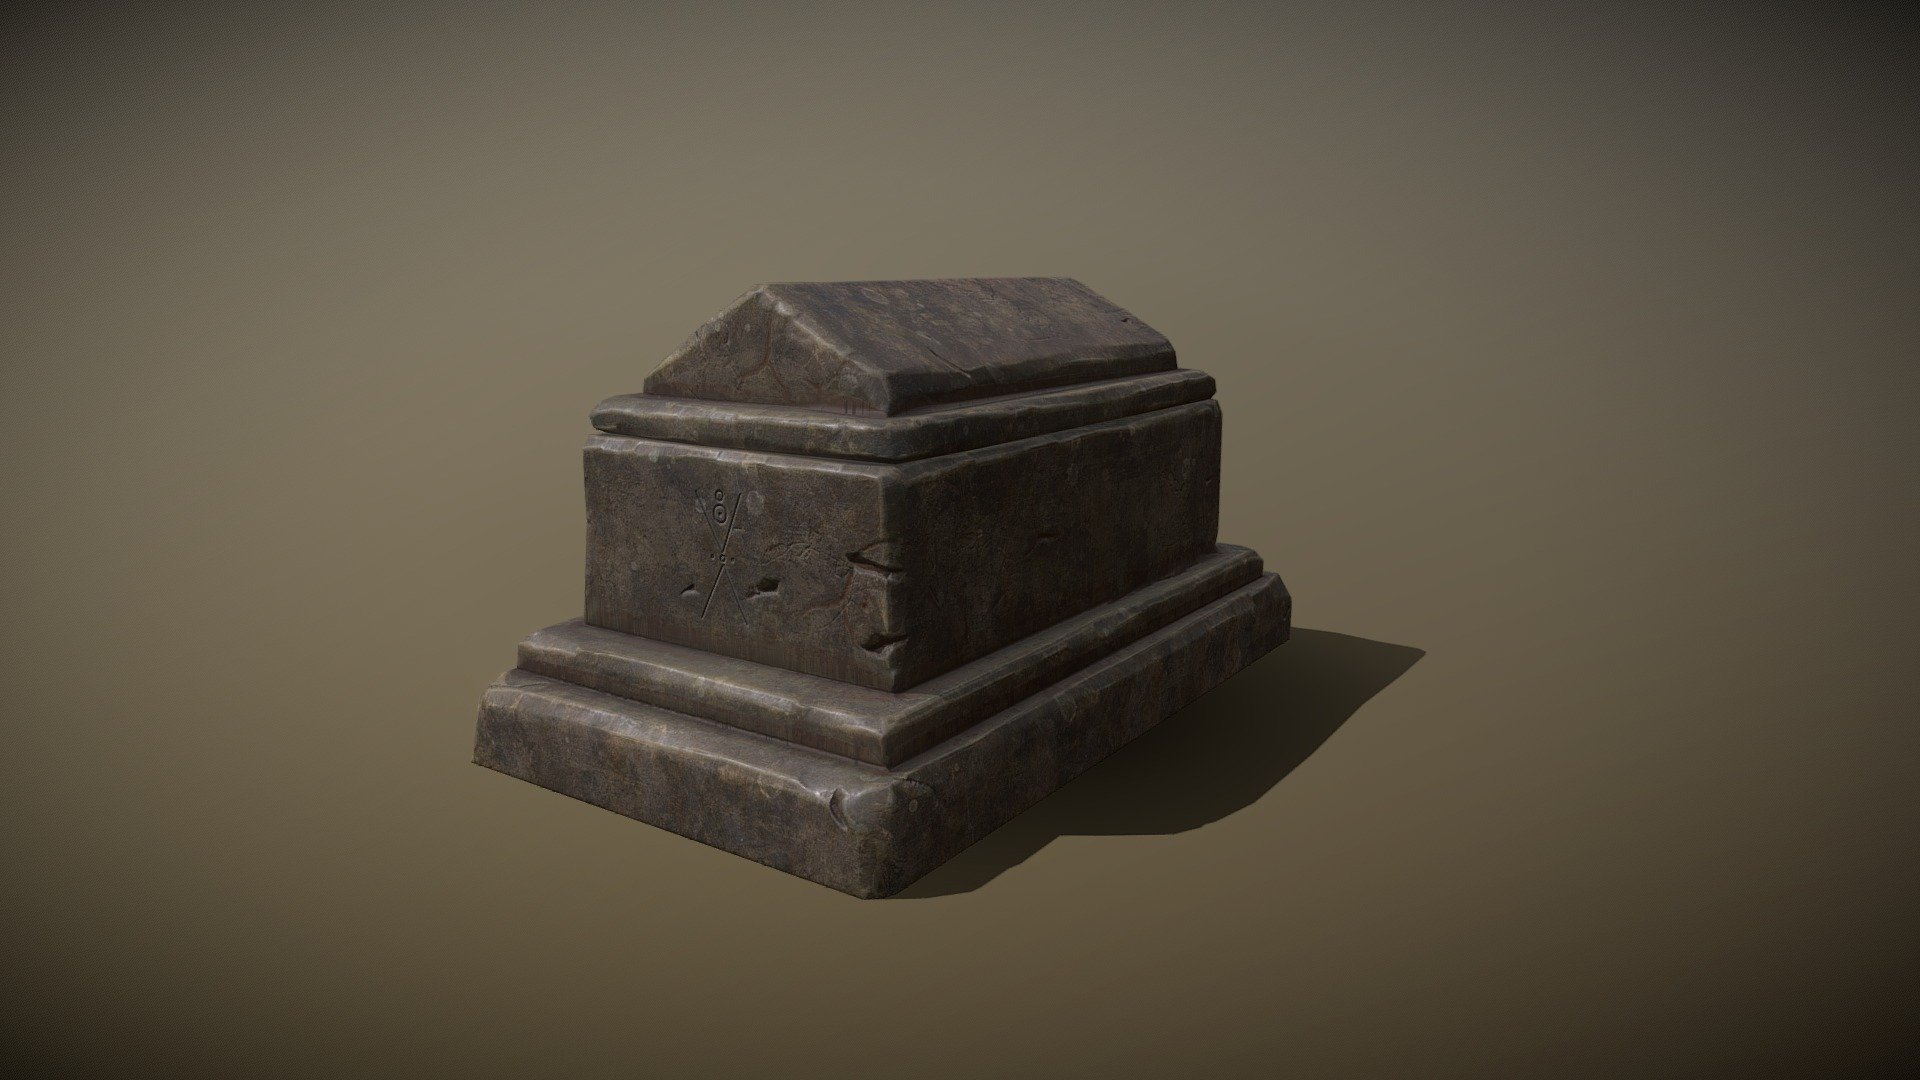 low poly tomb - Tomb - 3D model by DJMaesen (@bumstrum) 3d model